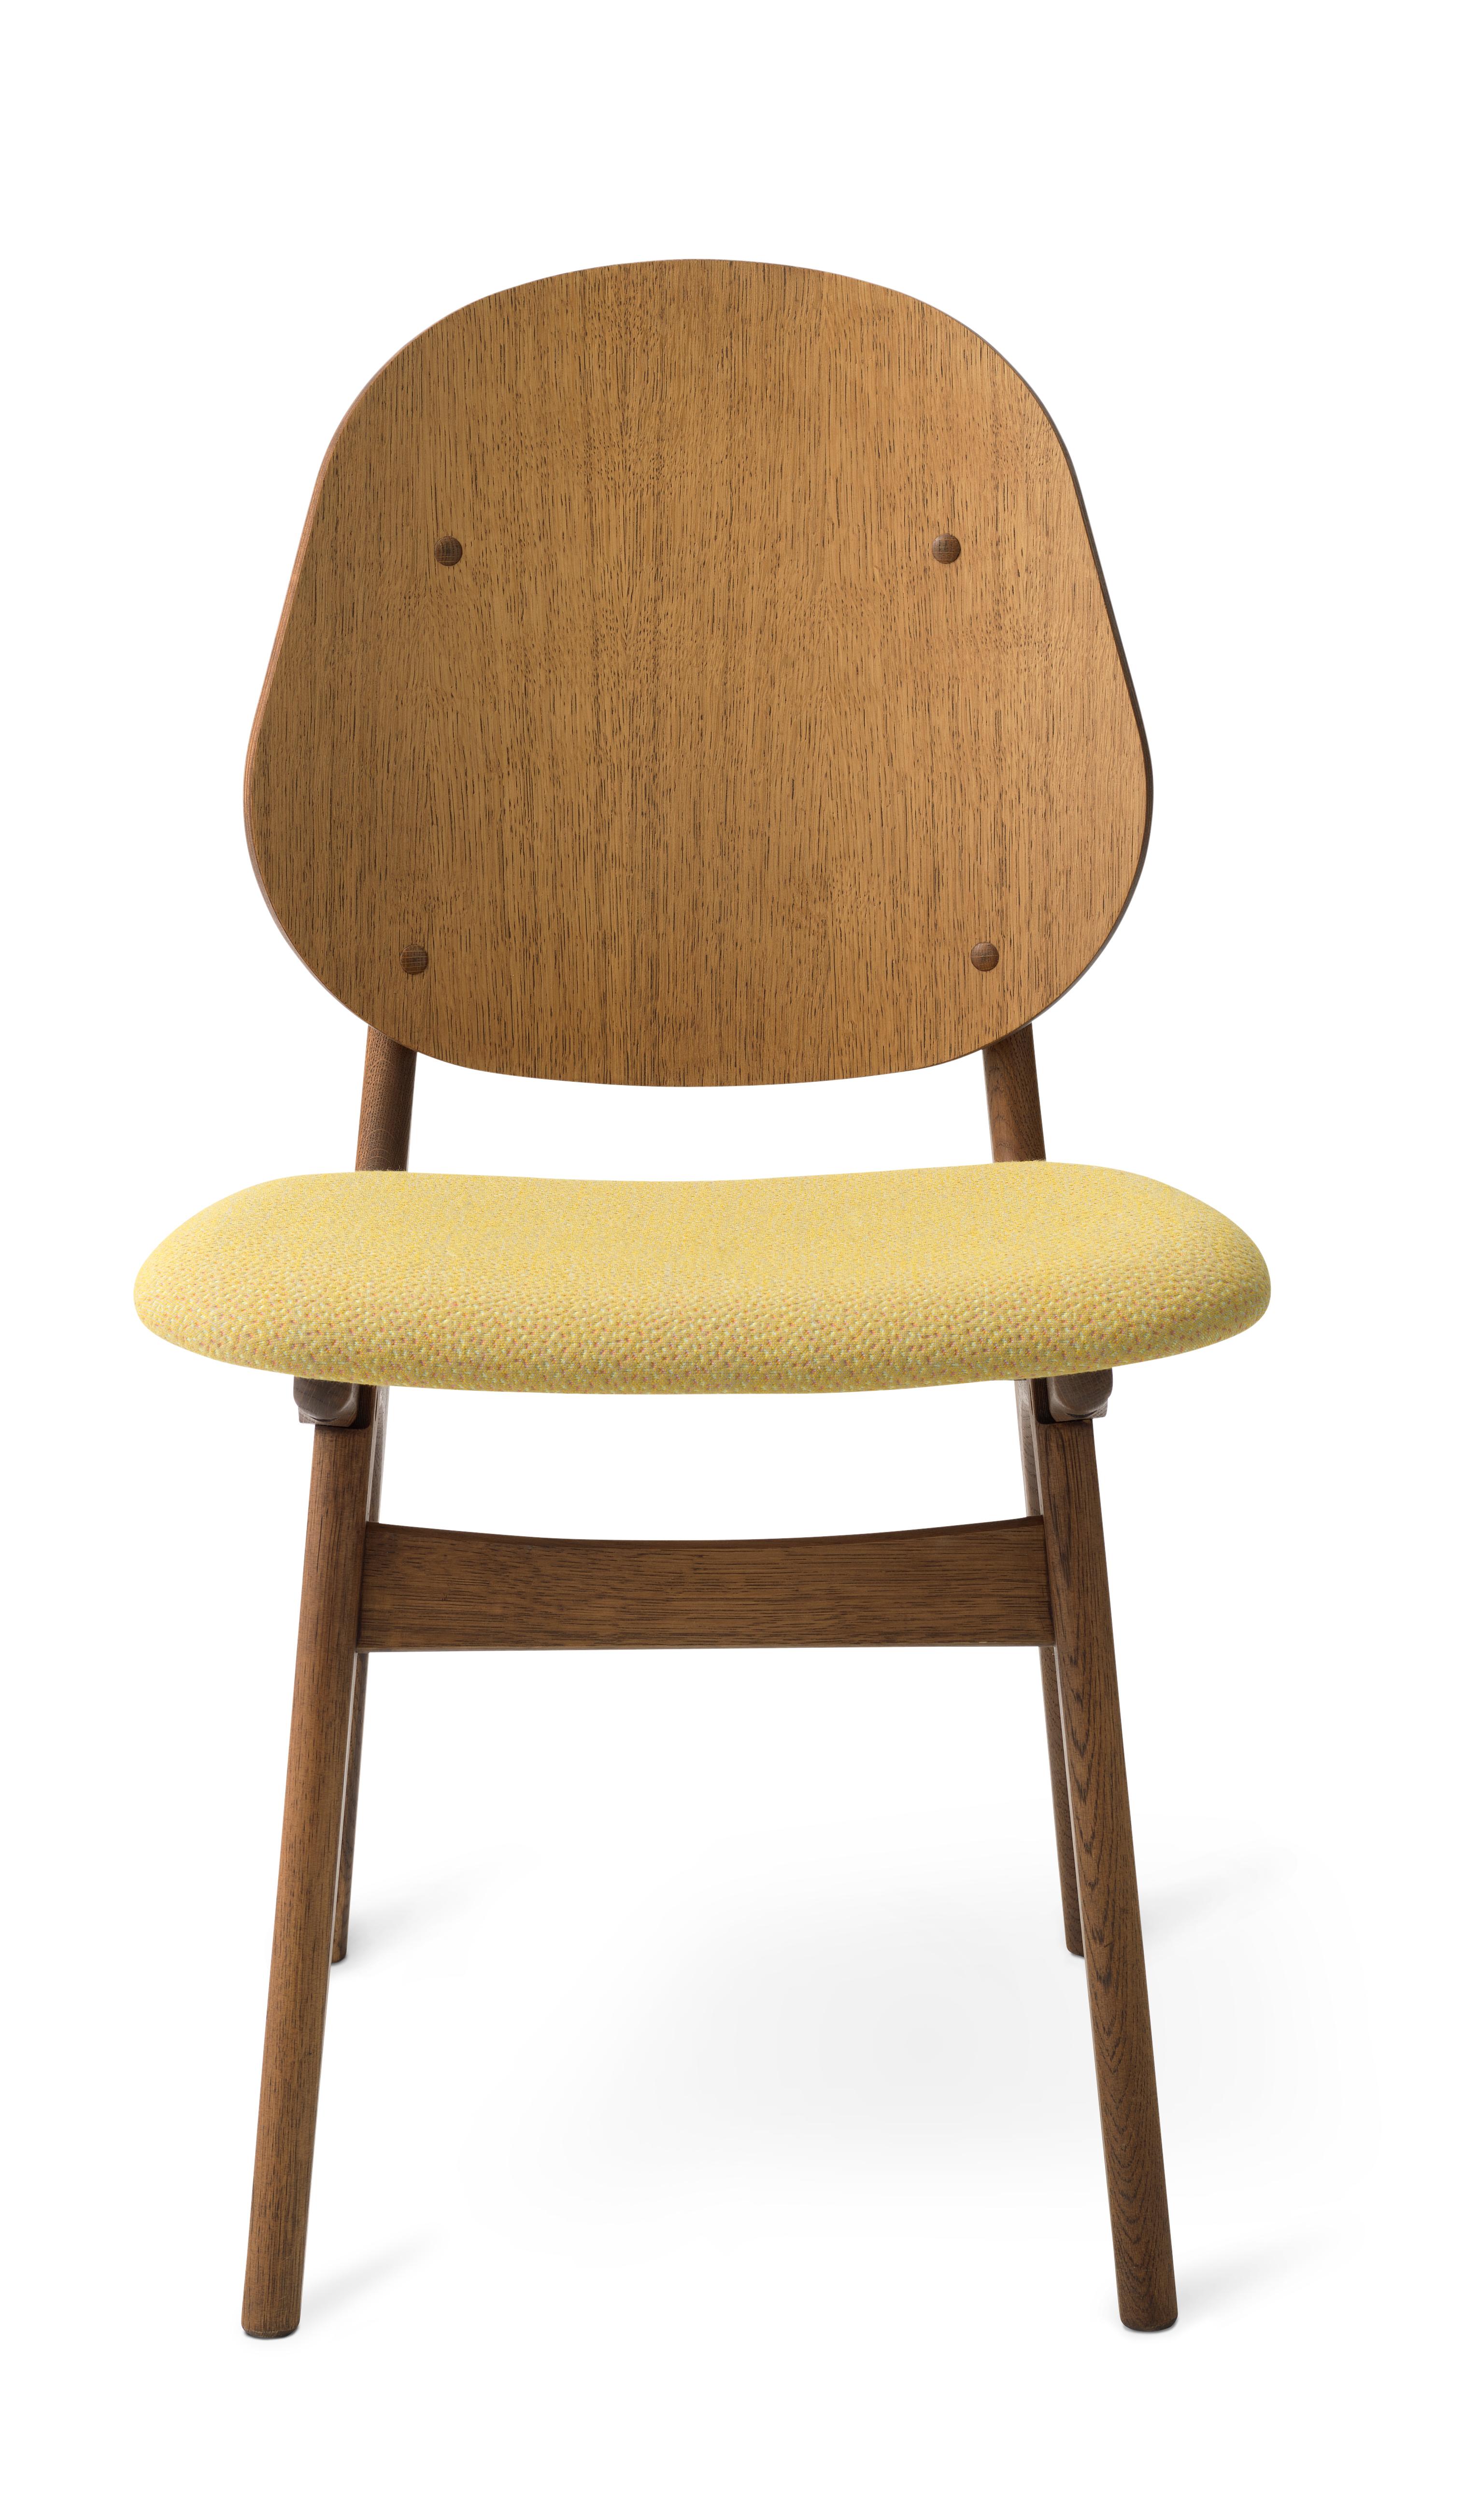 For Sale: Yellow (Sprinkles 424) Noble Chair in Teak Oak with Upholstery, by Arne Hovmand-Olsen from Warm Nordic